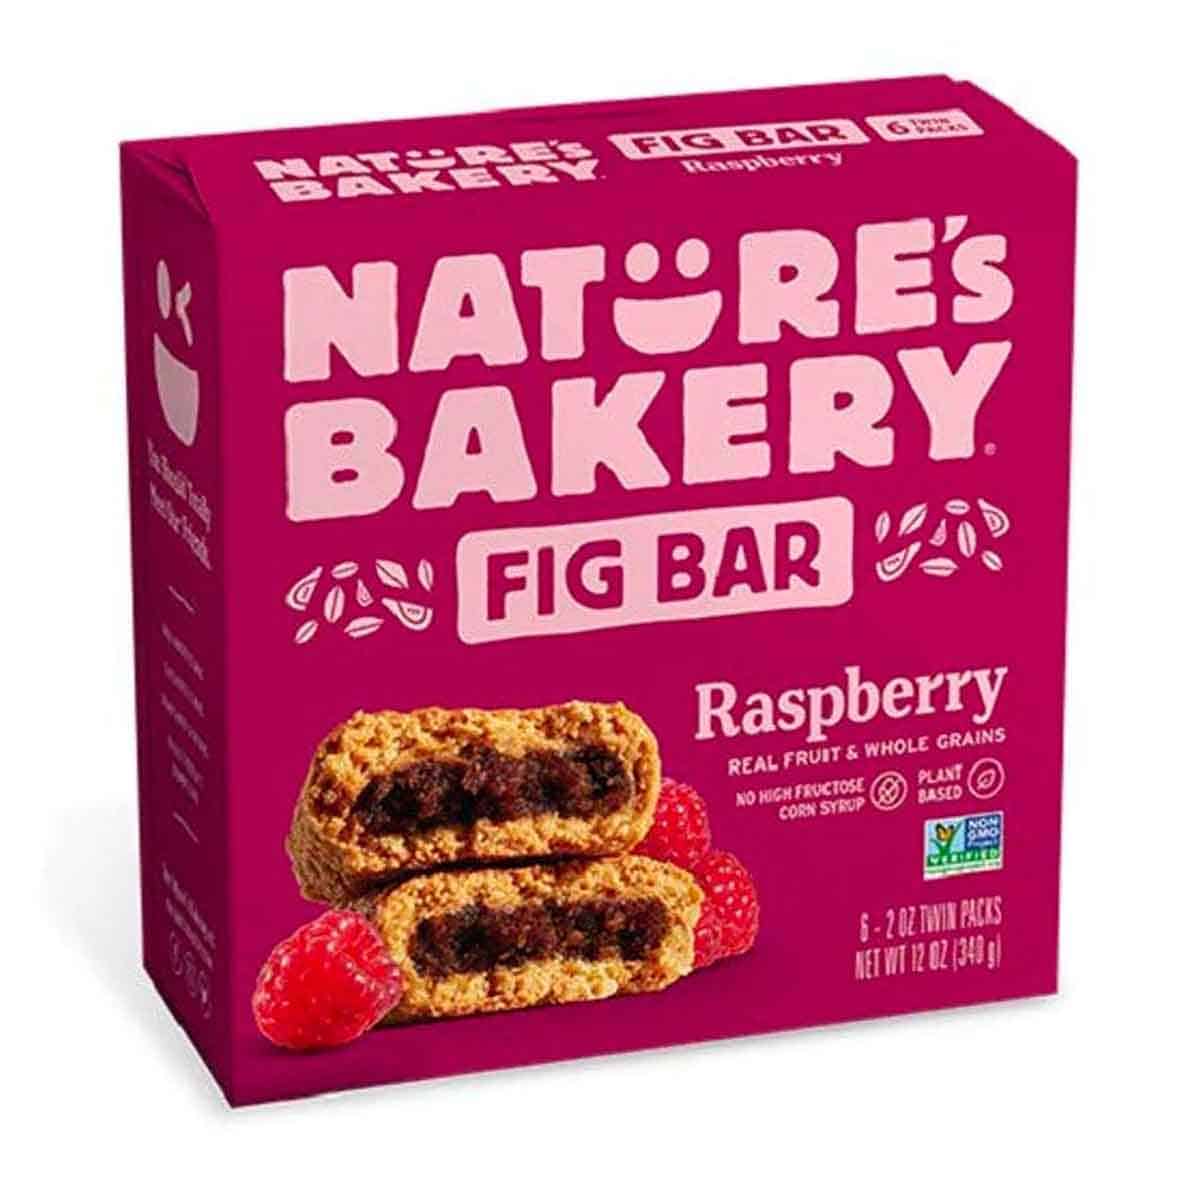 A pink box of raspberry fig bars by "Nature's Bakery". 